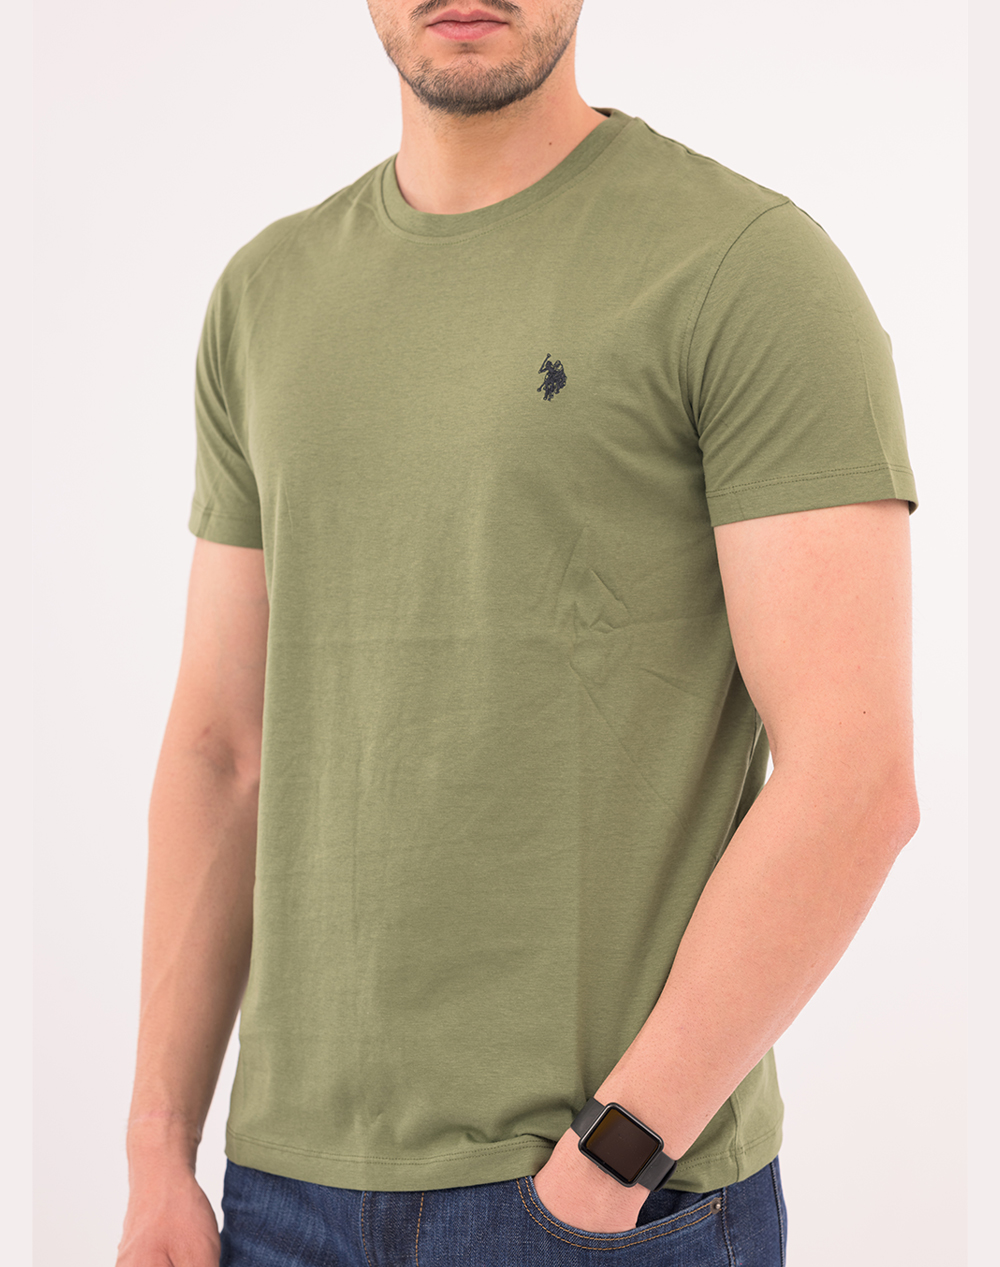 US POLO ASSN MICK 49351 EH33 PACK OF 200 ΜΠΛΟΥΖΑ ΑΝΔΡΙΚΟ 6735949351P200-141 Olive